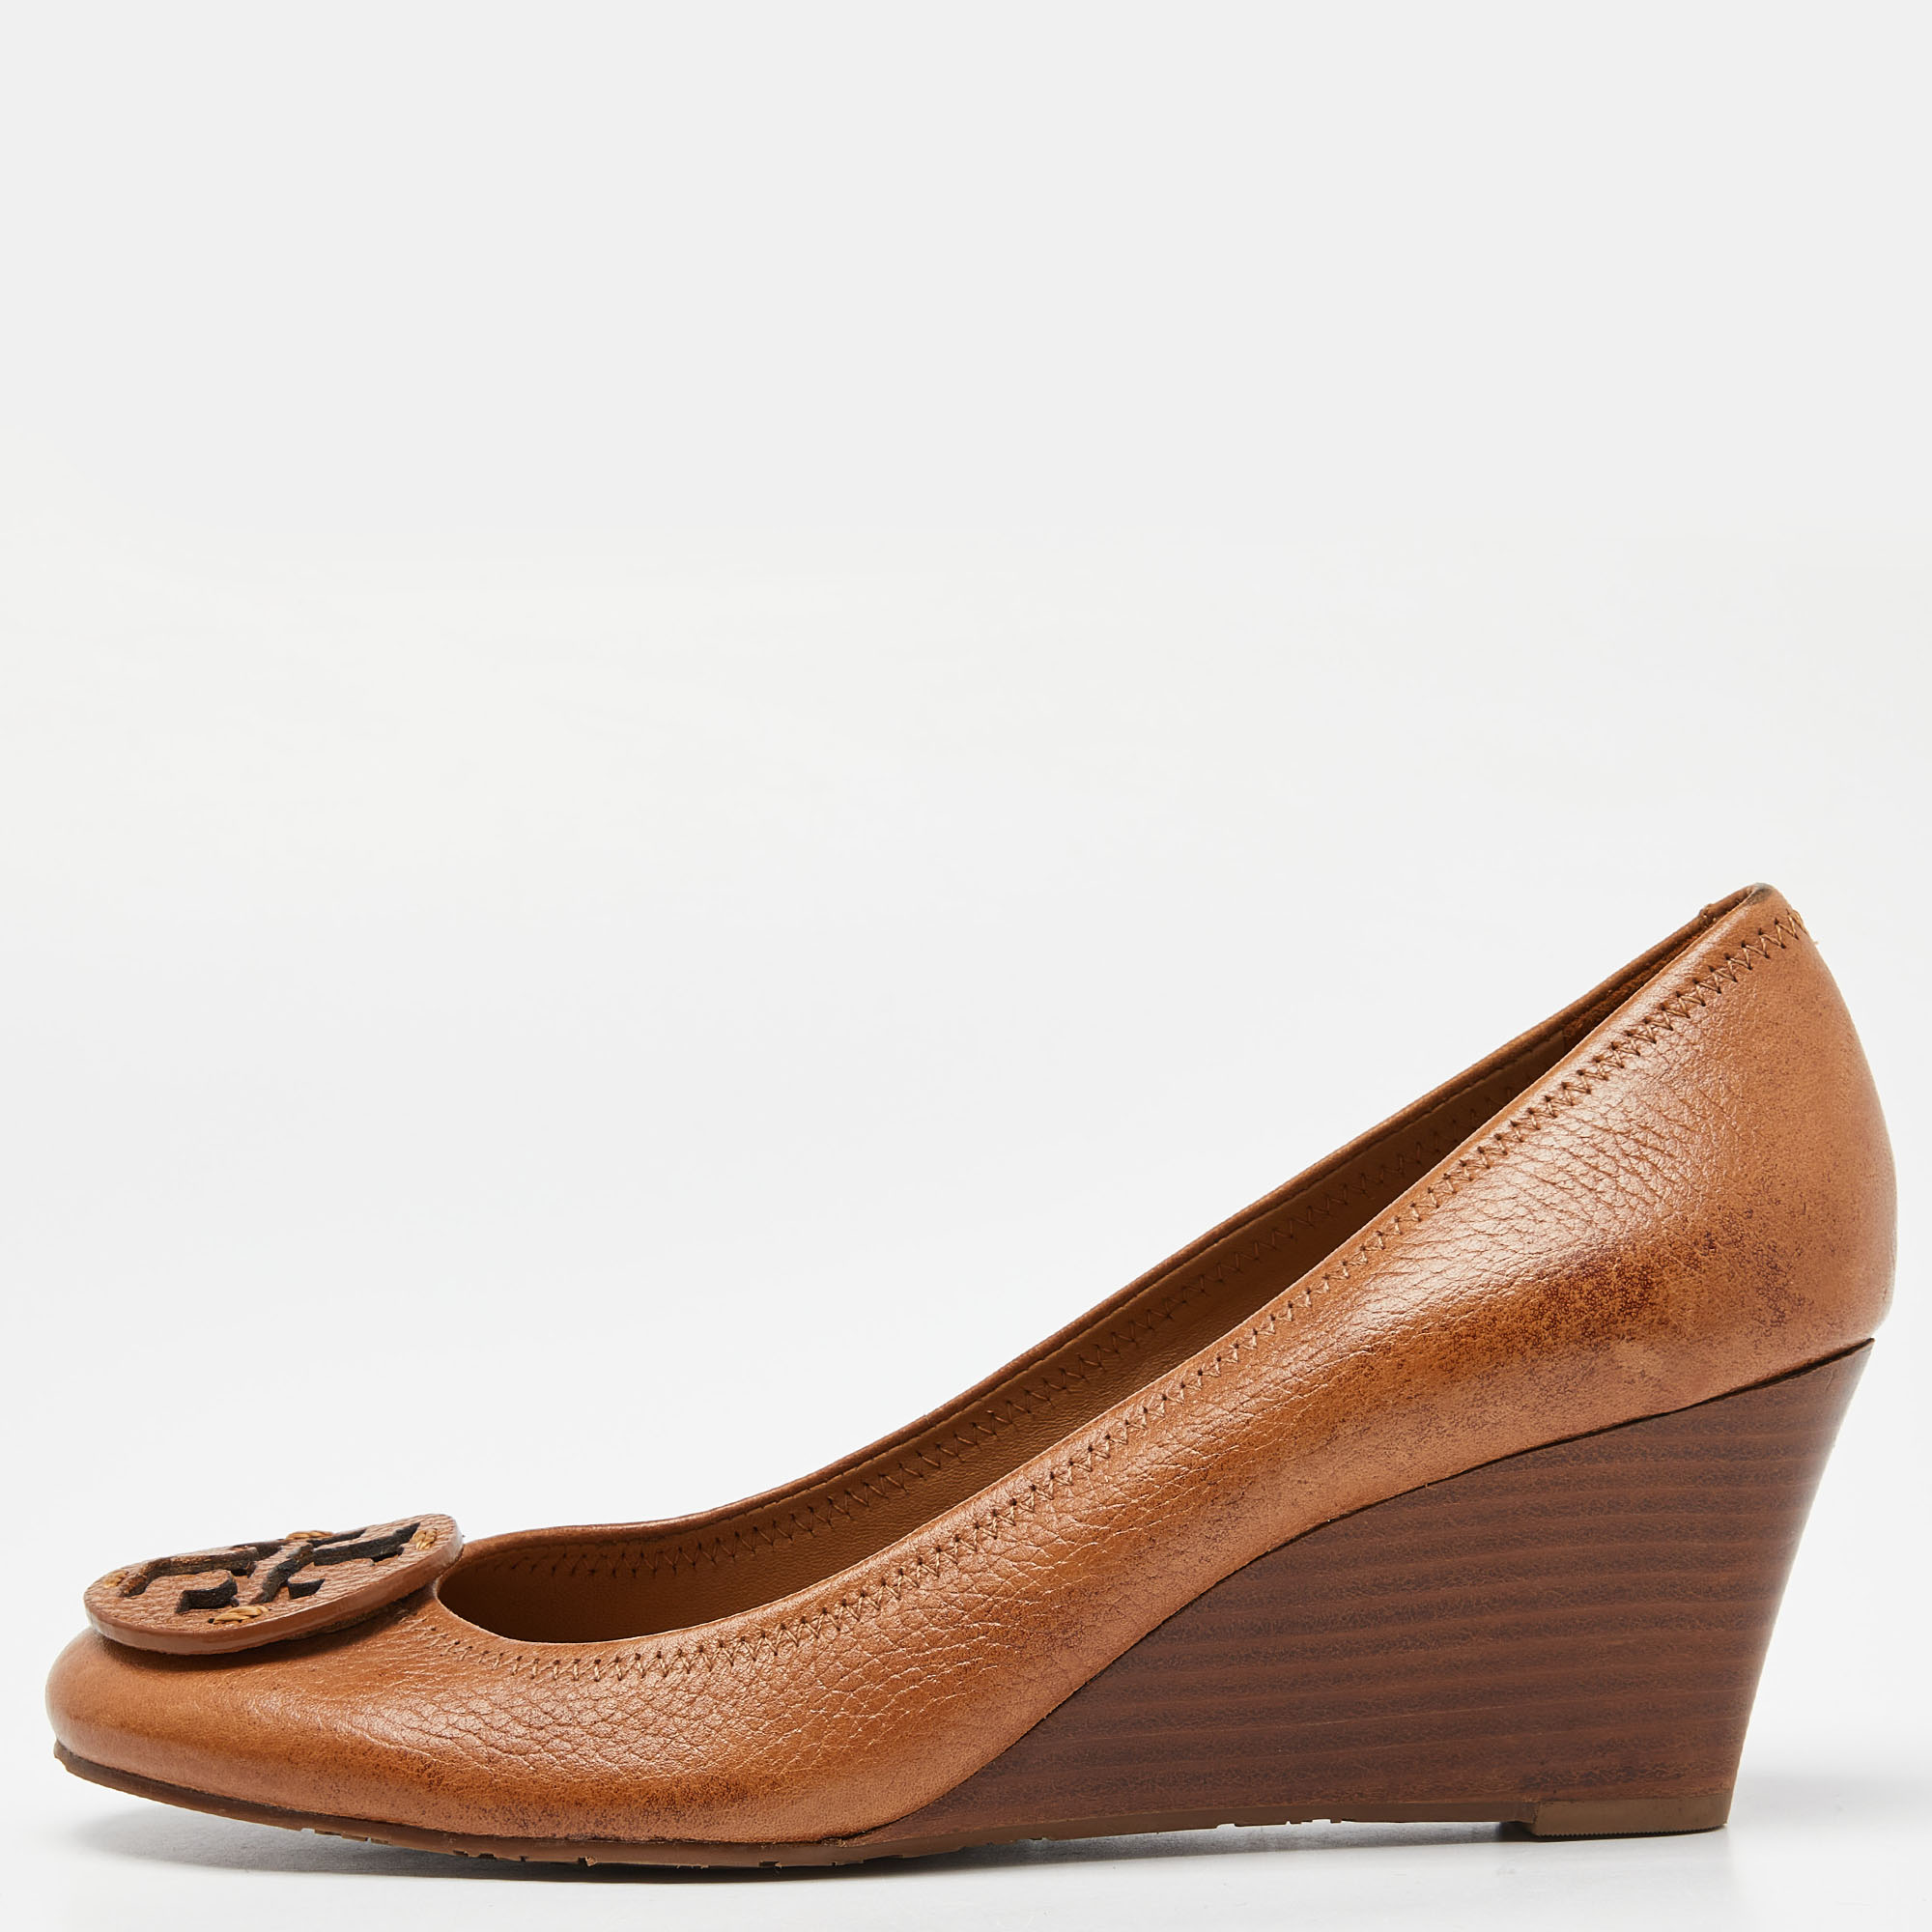 

Tory Burch Brown Leather Sally Wedge Pumps Size